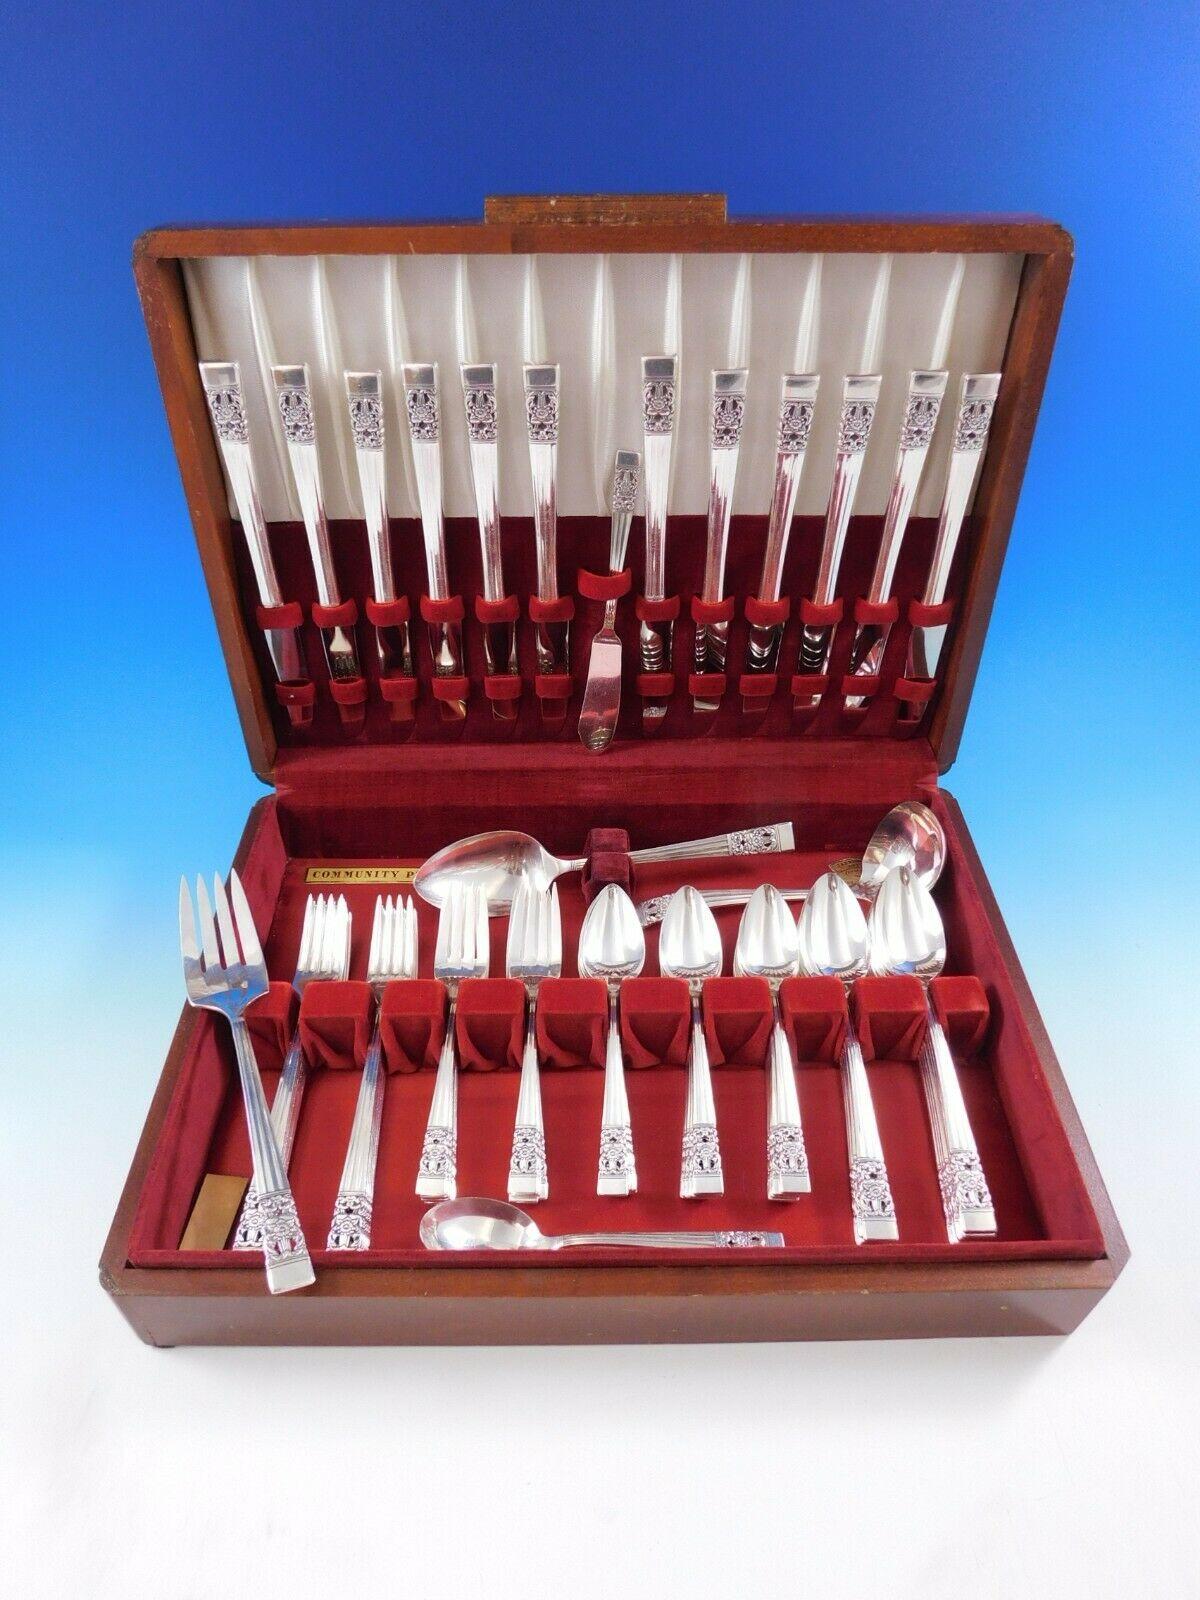 Vintage heirloom quality coronation by Community Oneida silver plate flatware set, 78 pieces. This set includes:

12 grille size knives, 8 3/8